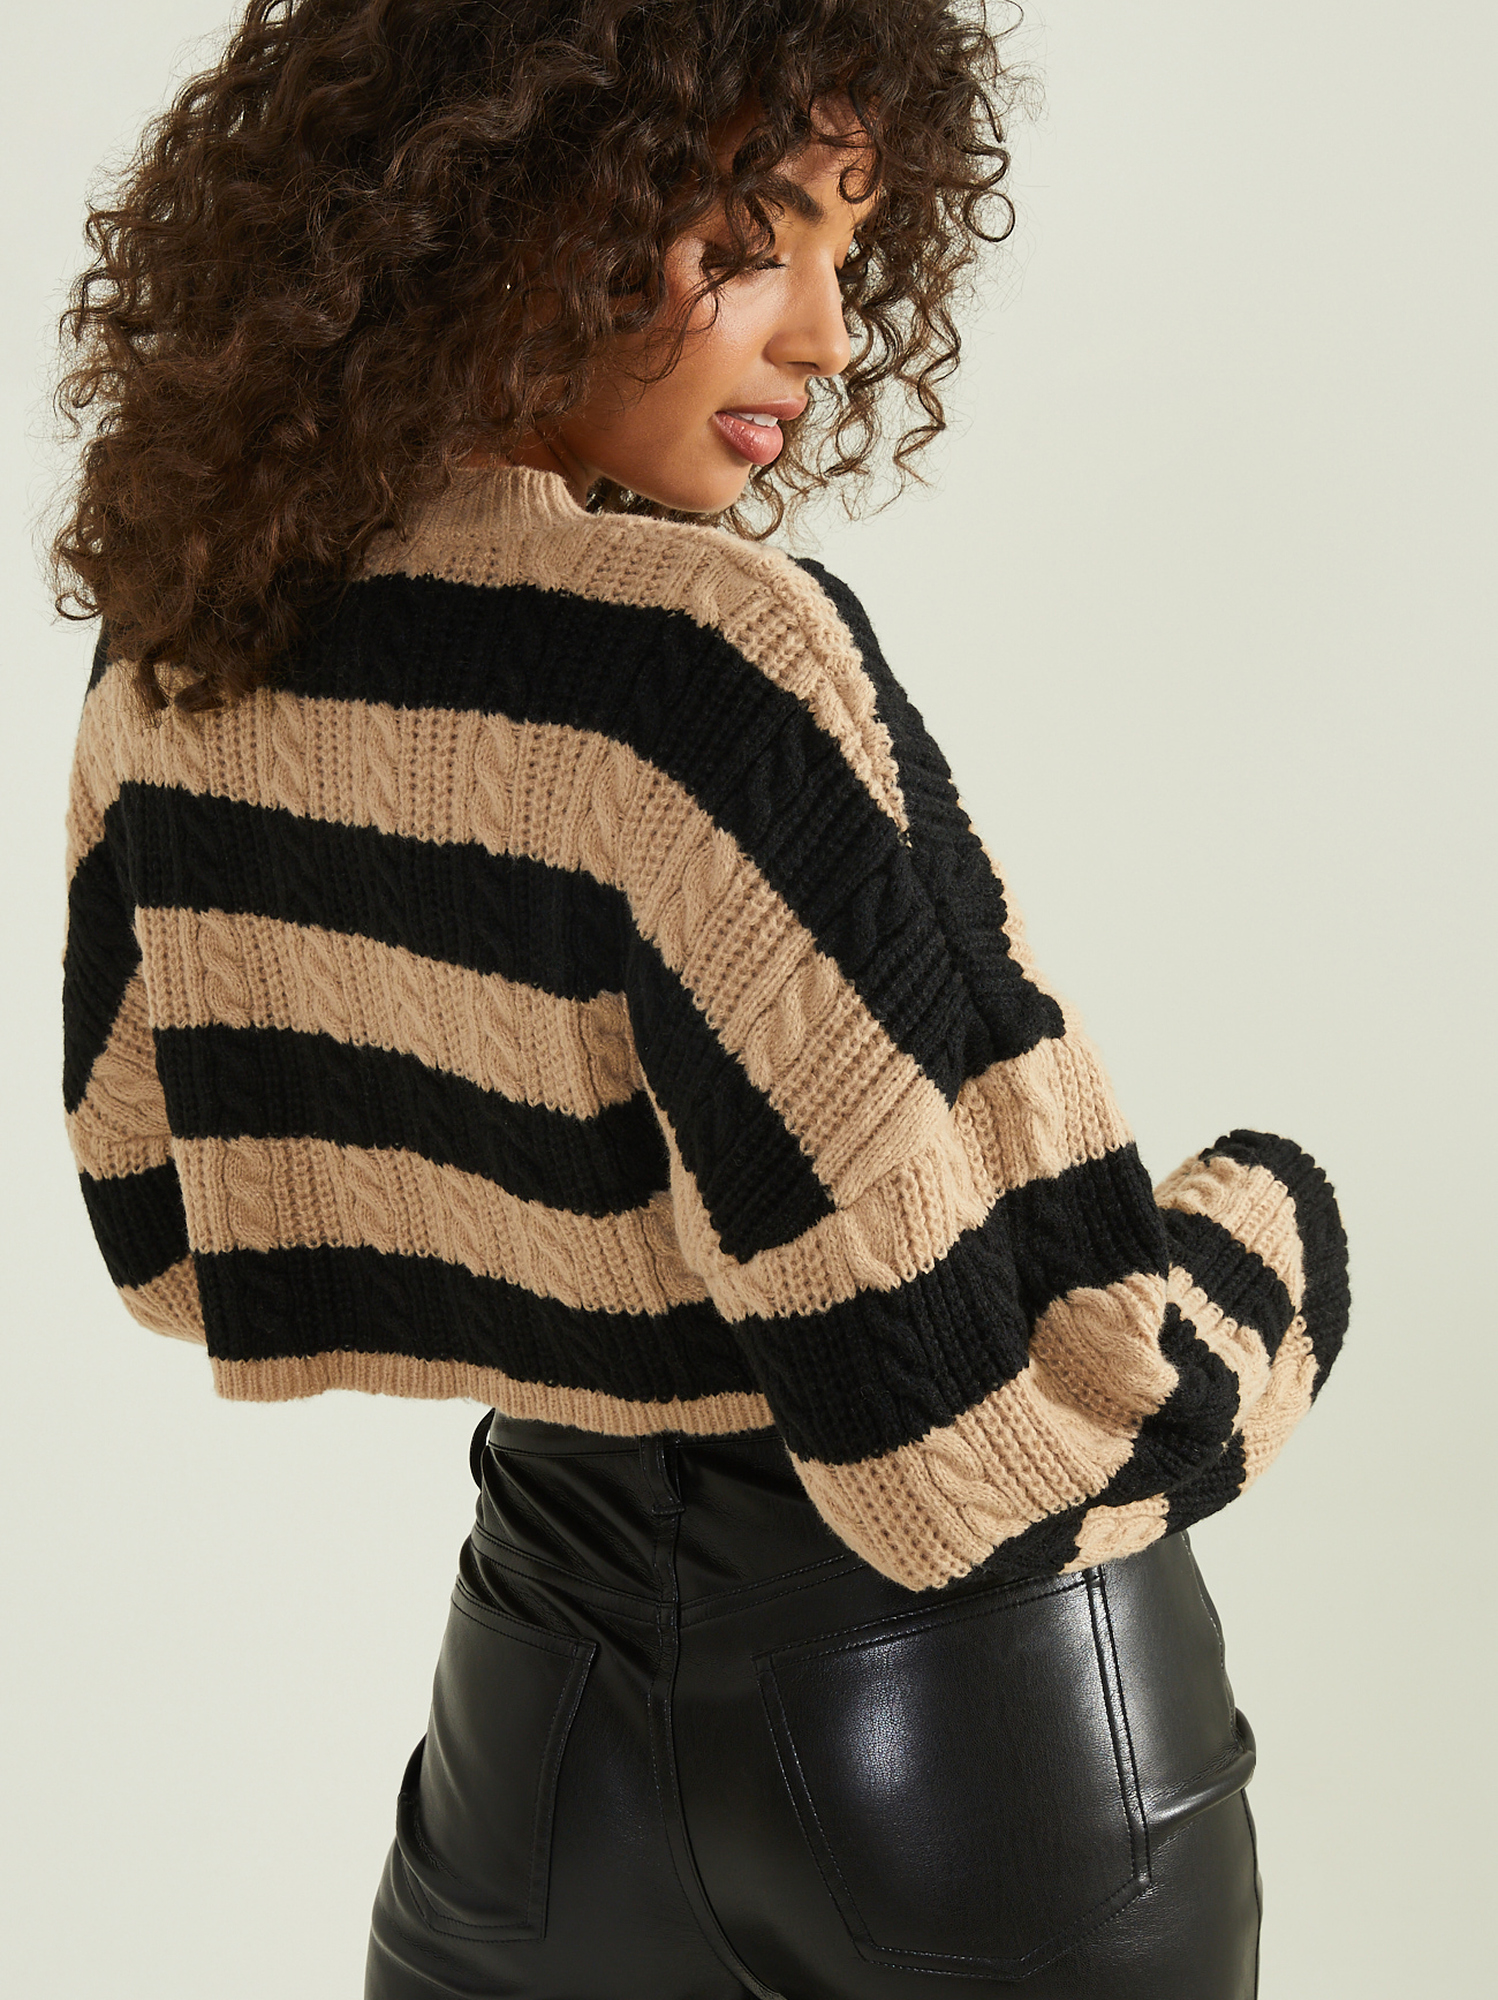 Jade Cropped Striped Sweater in Tan and Black | Altar'd State